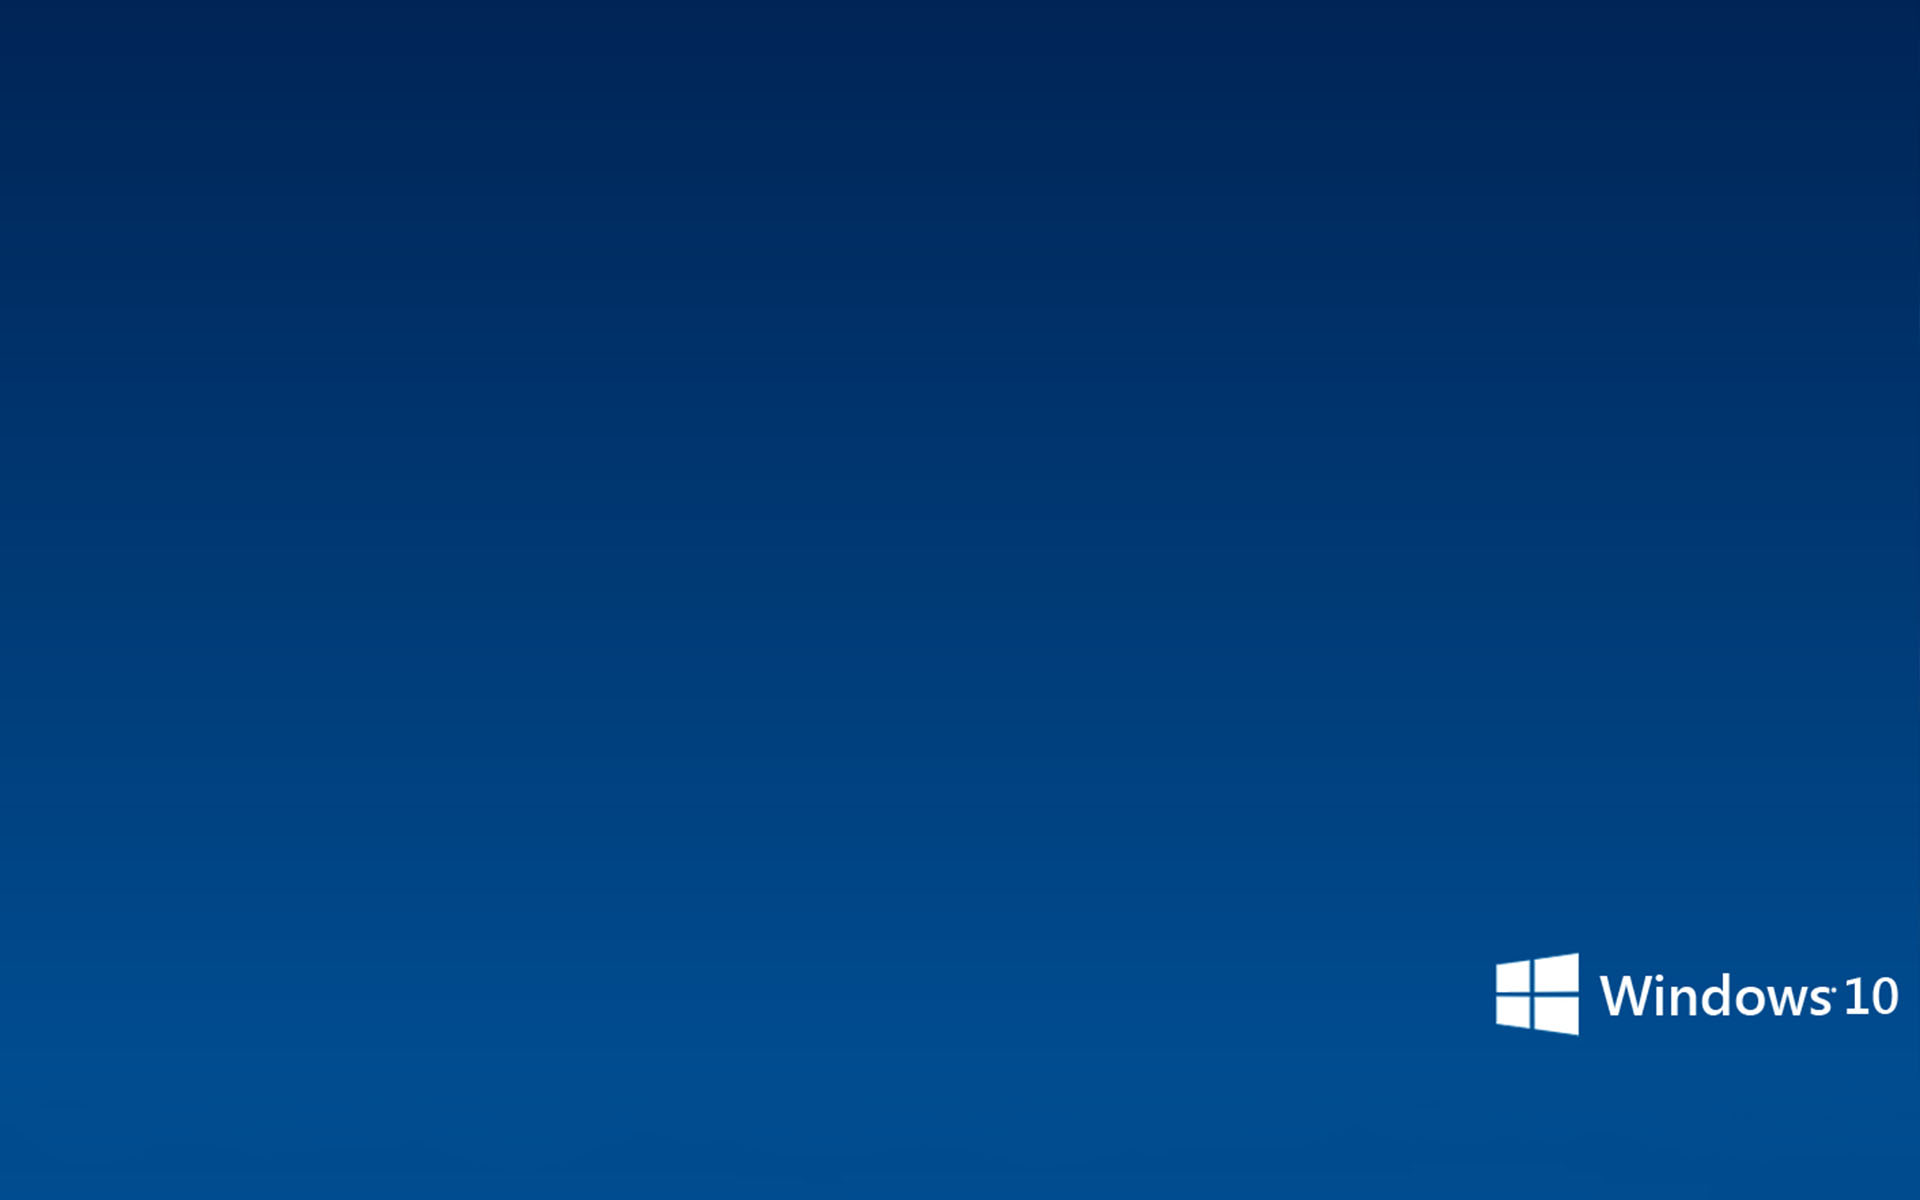 Free Download Simple Microsoft Windows 10 Wallpaper Wallpapers 19x10 For Your Desktop Mobile Tablet Explore 48 Microsoft Windows 10 Wallpaper Download Free Wallpaper Backgrounds Windows 10 Official Wallpapers Windows 10 Mobile Hd Wallpapers